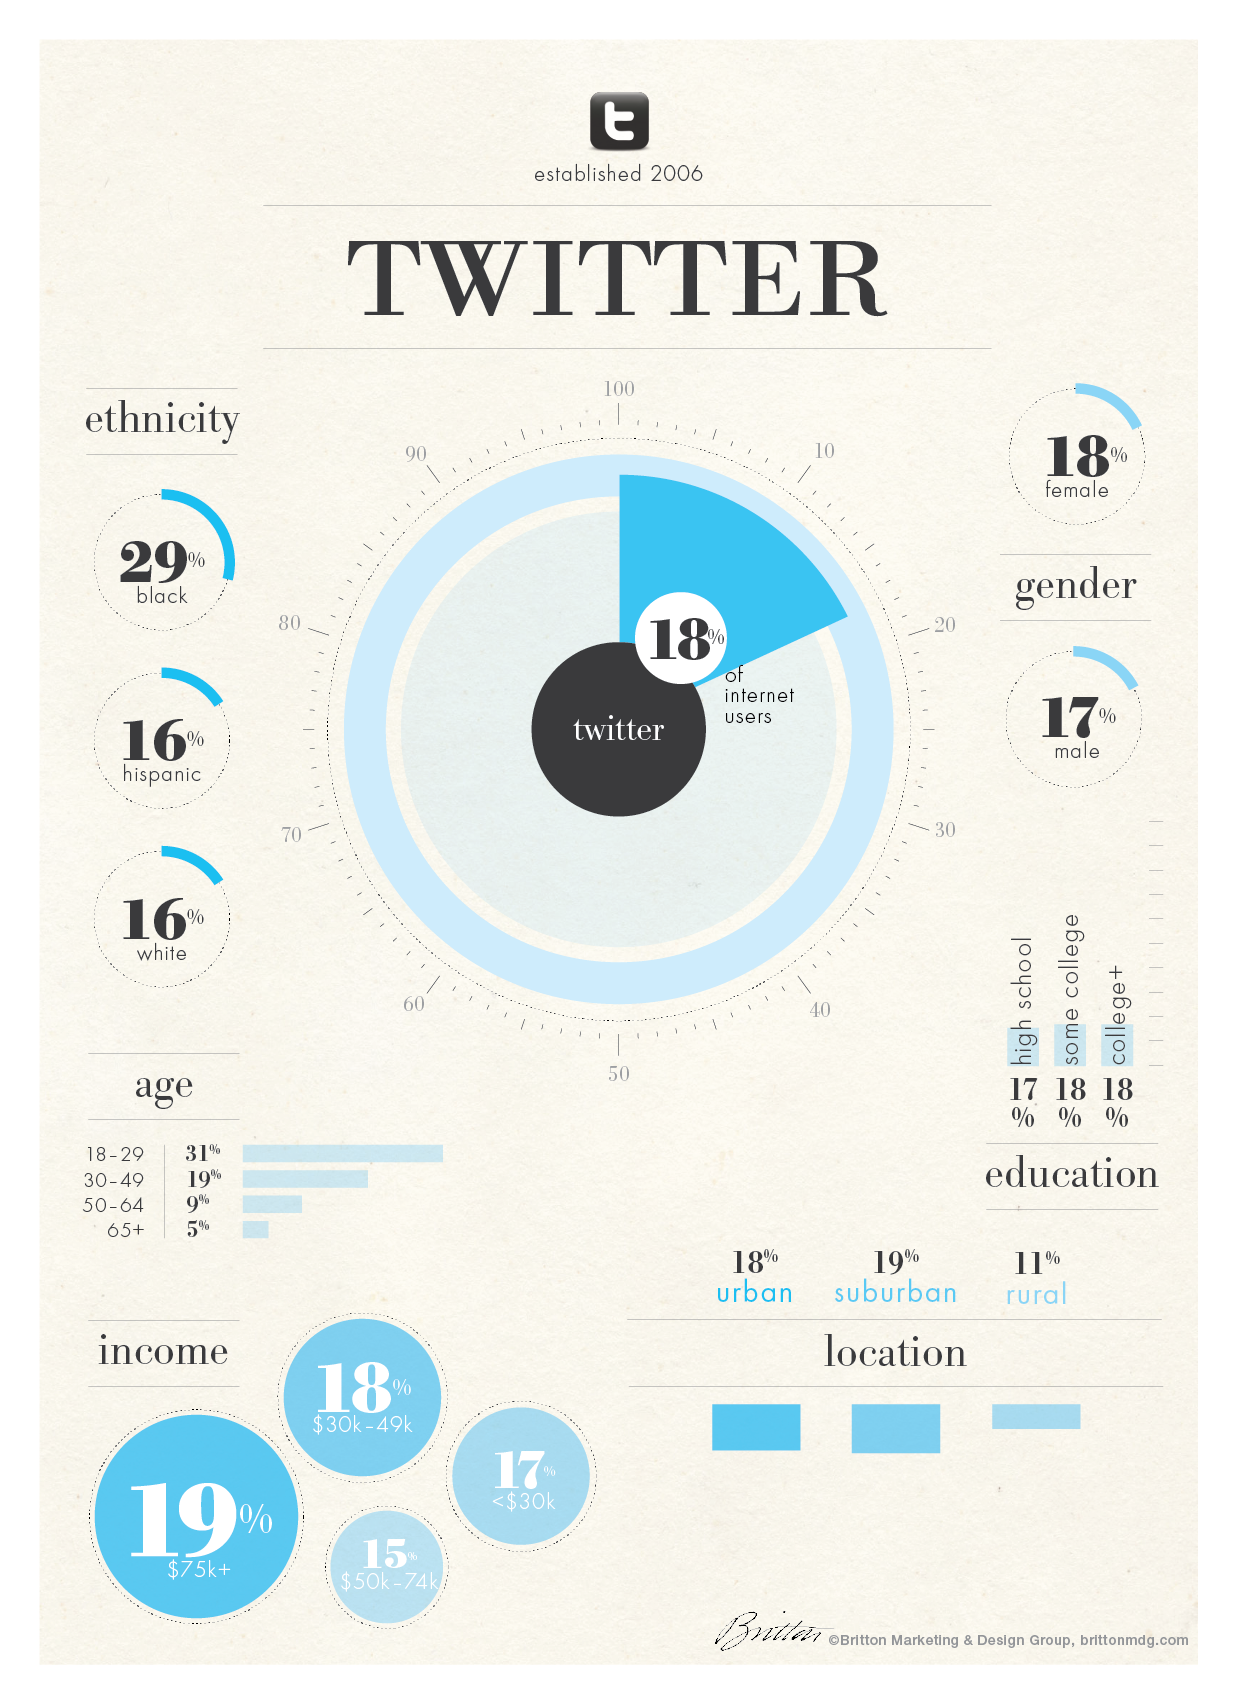 #Infographic: The demographics of #Twitter users - #socialmedia